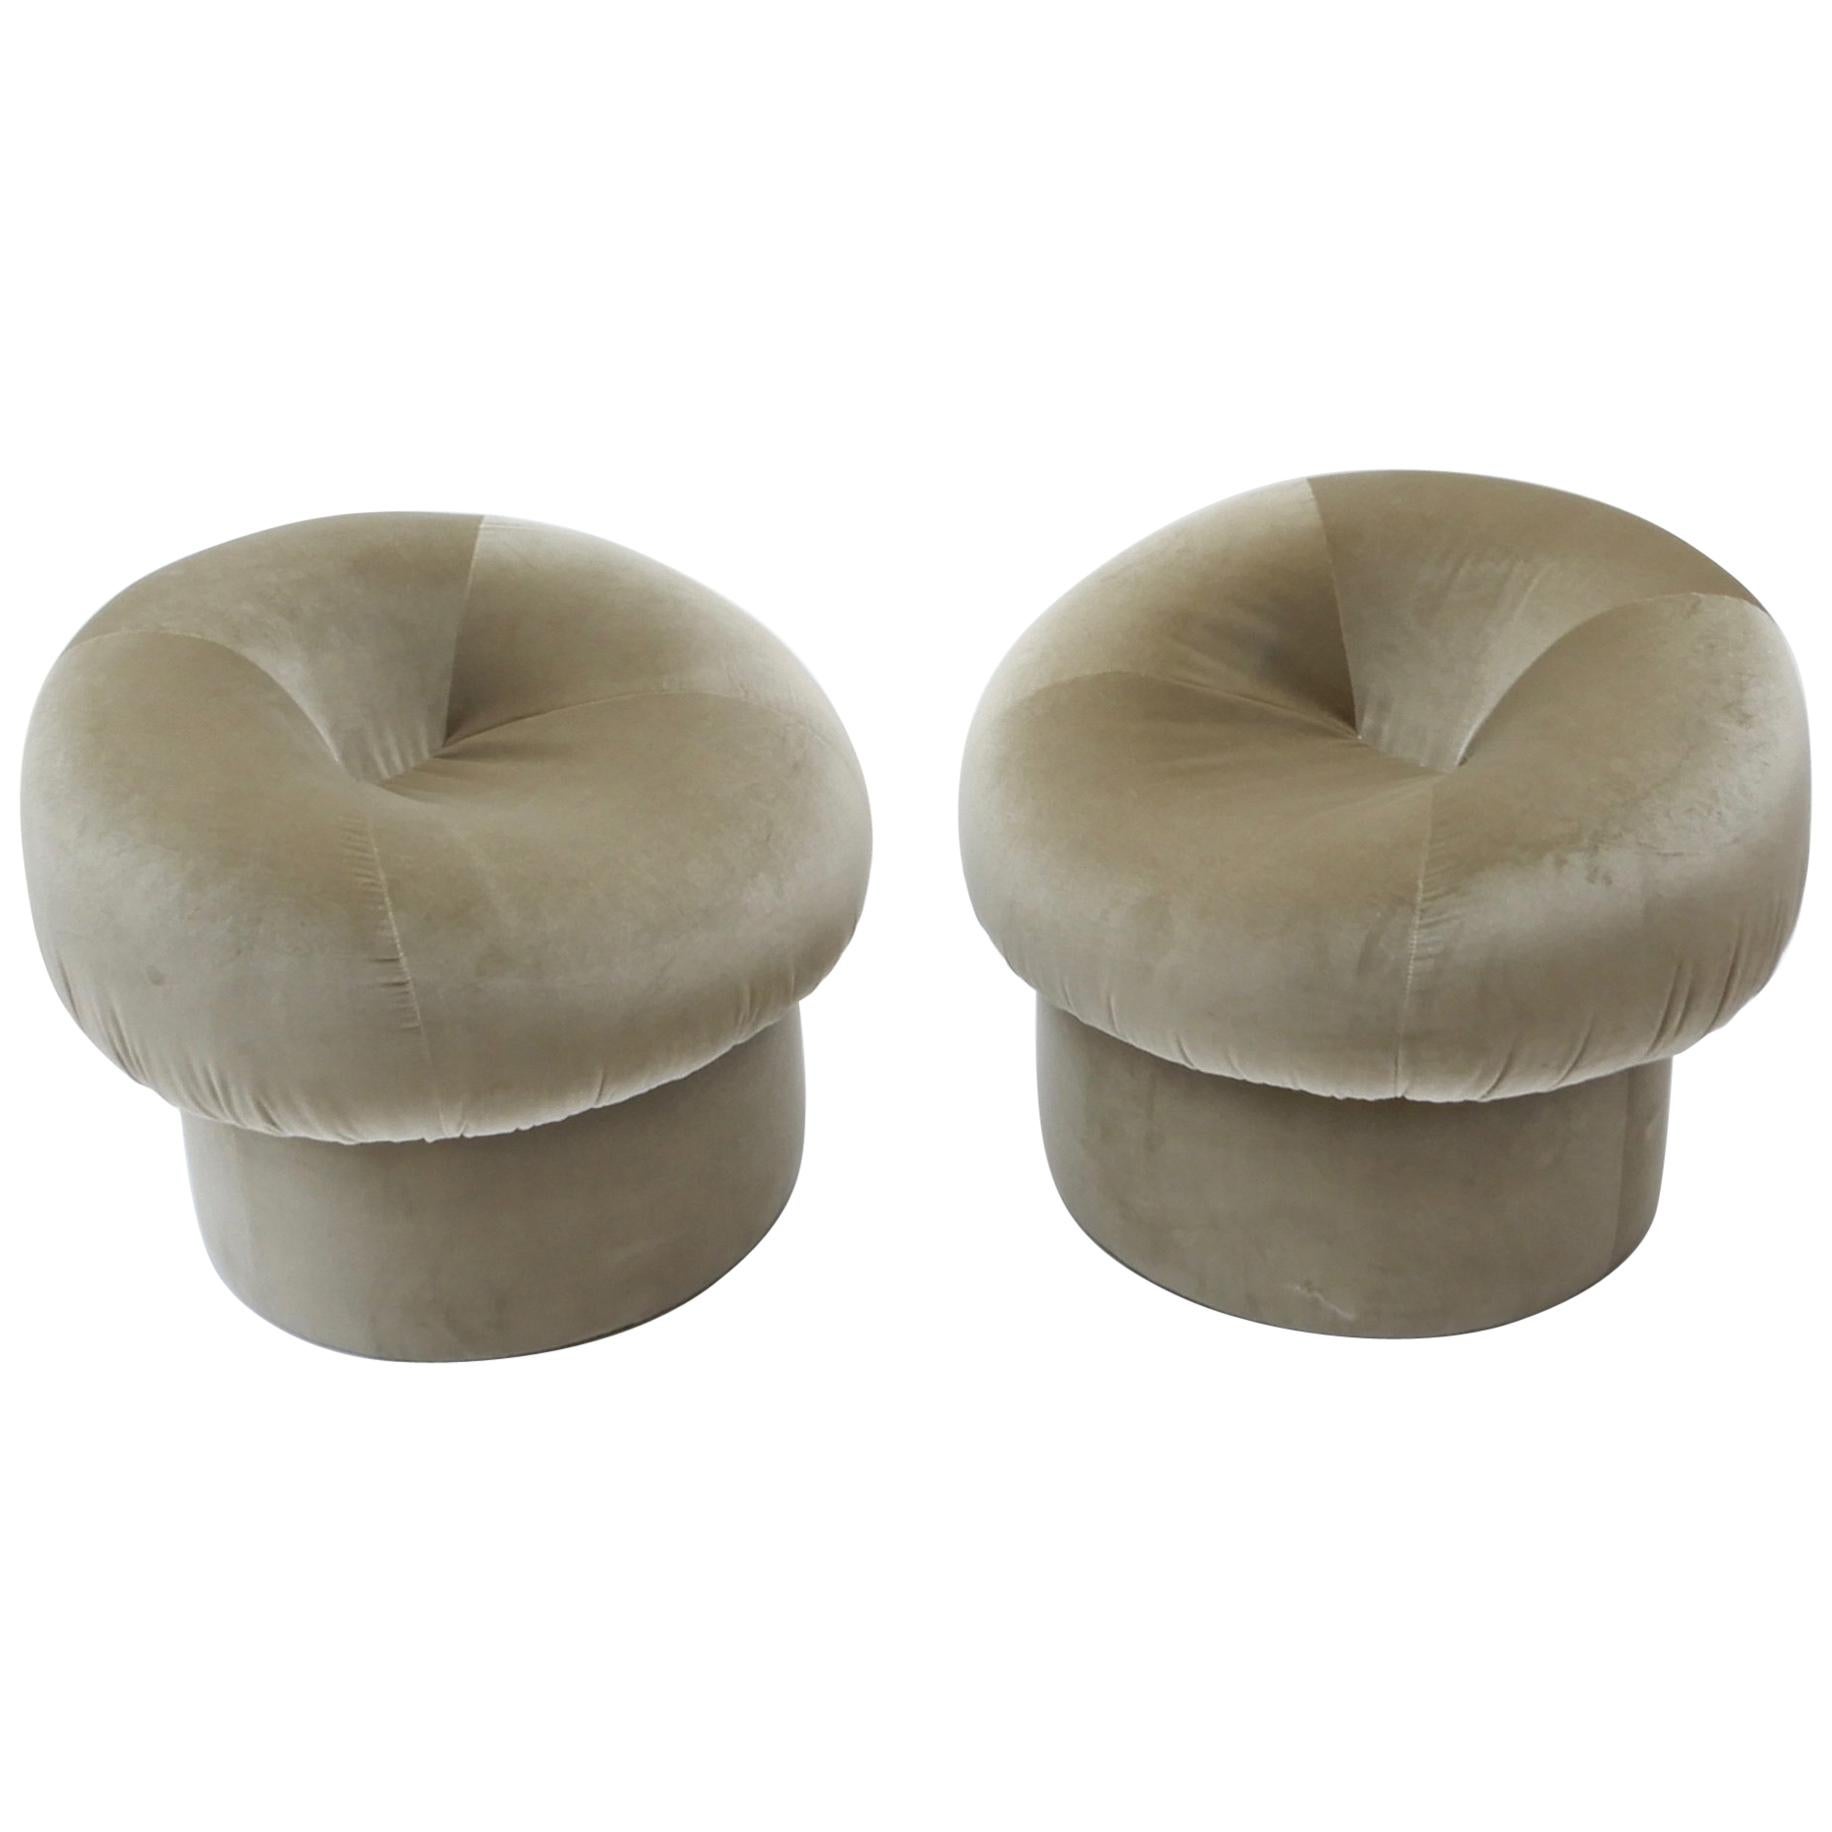 Pair of Mid-Century Modern Style Pouf or Lounge Chairs with Grey Fabric